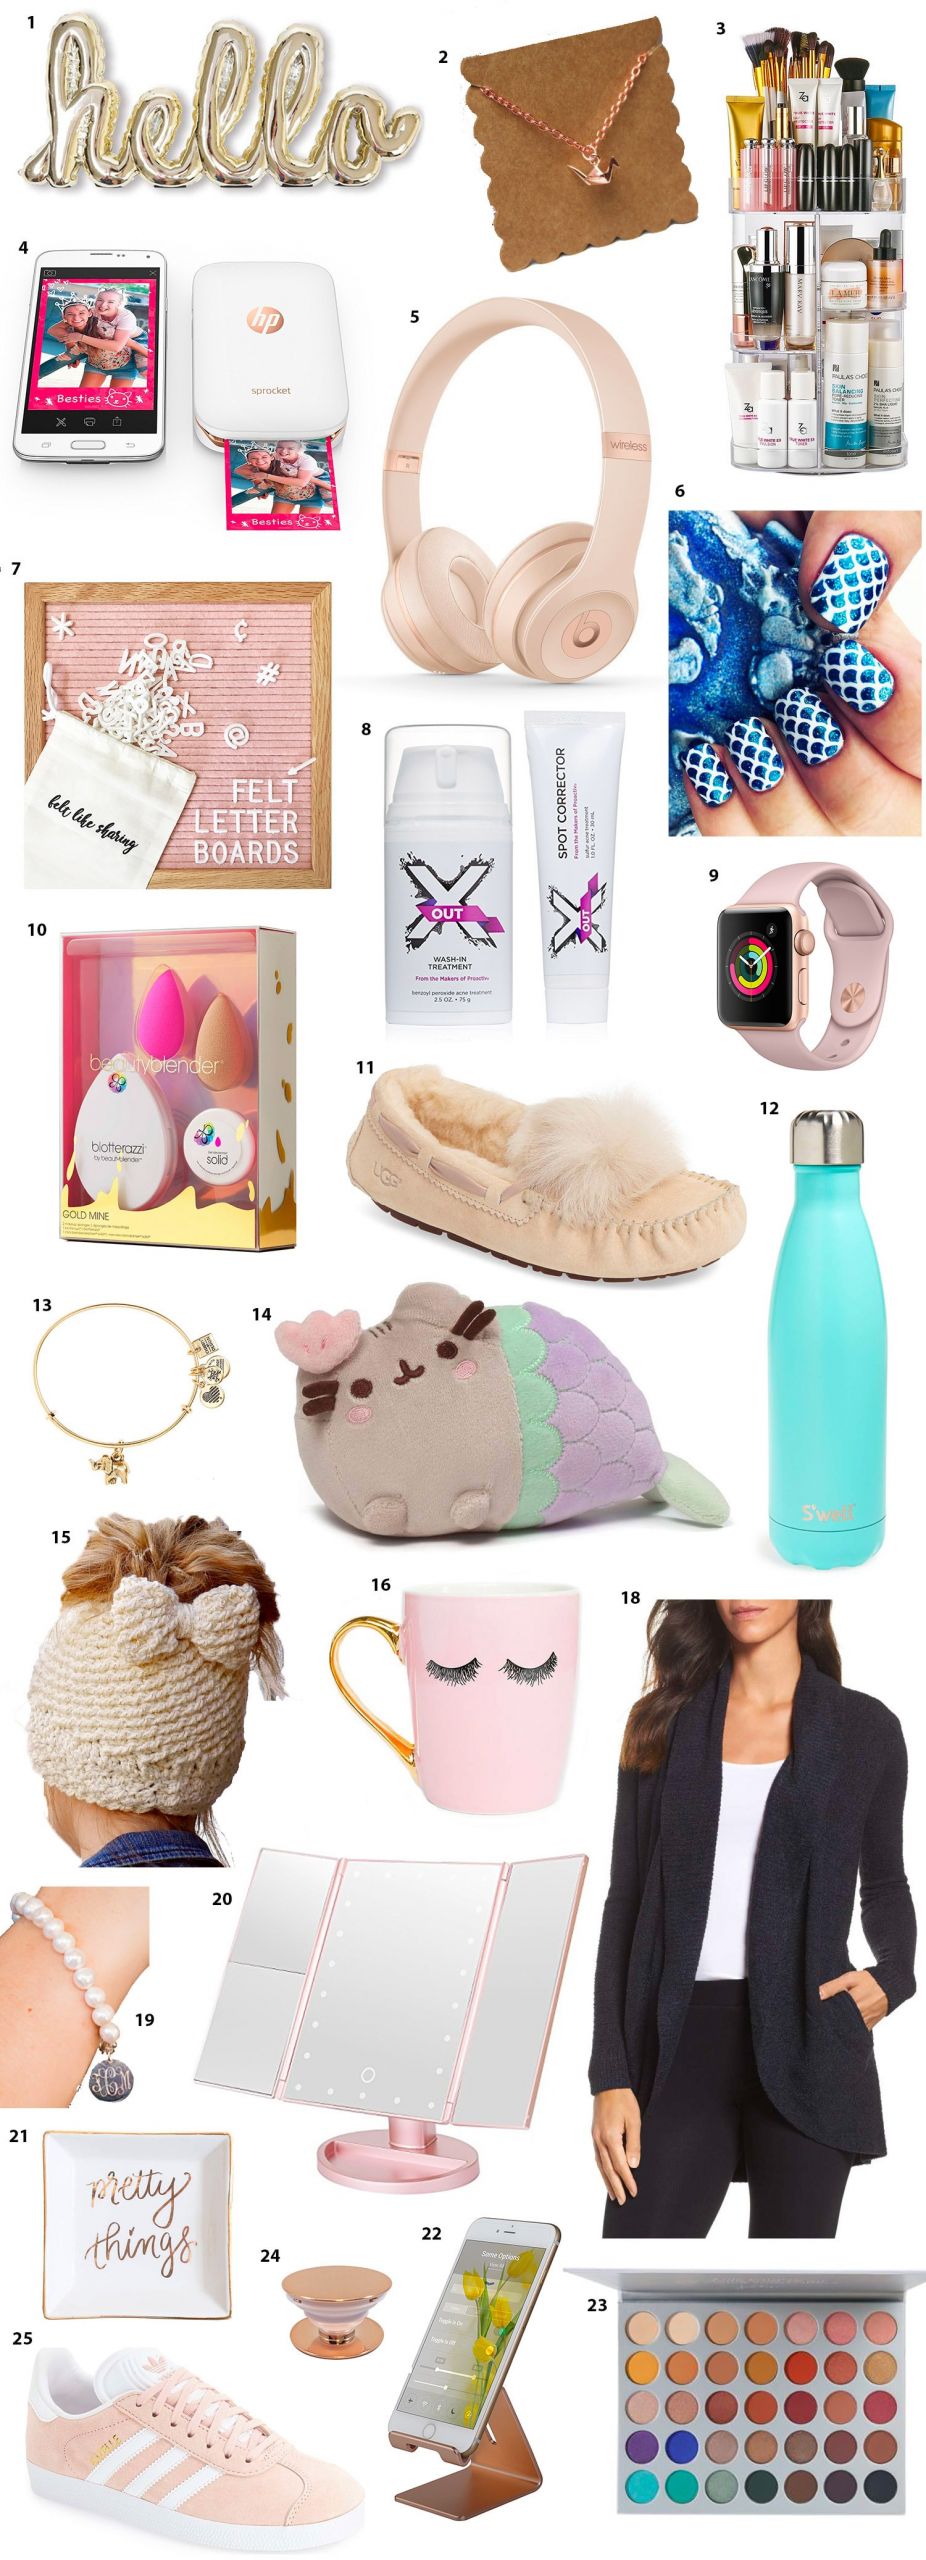 Best Gift Ideas For Teens
 Top Gifts for Teens This Christmas